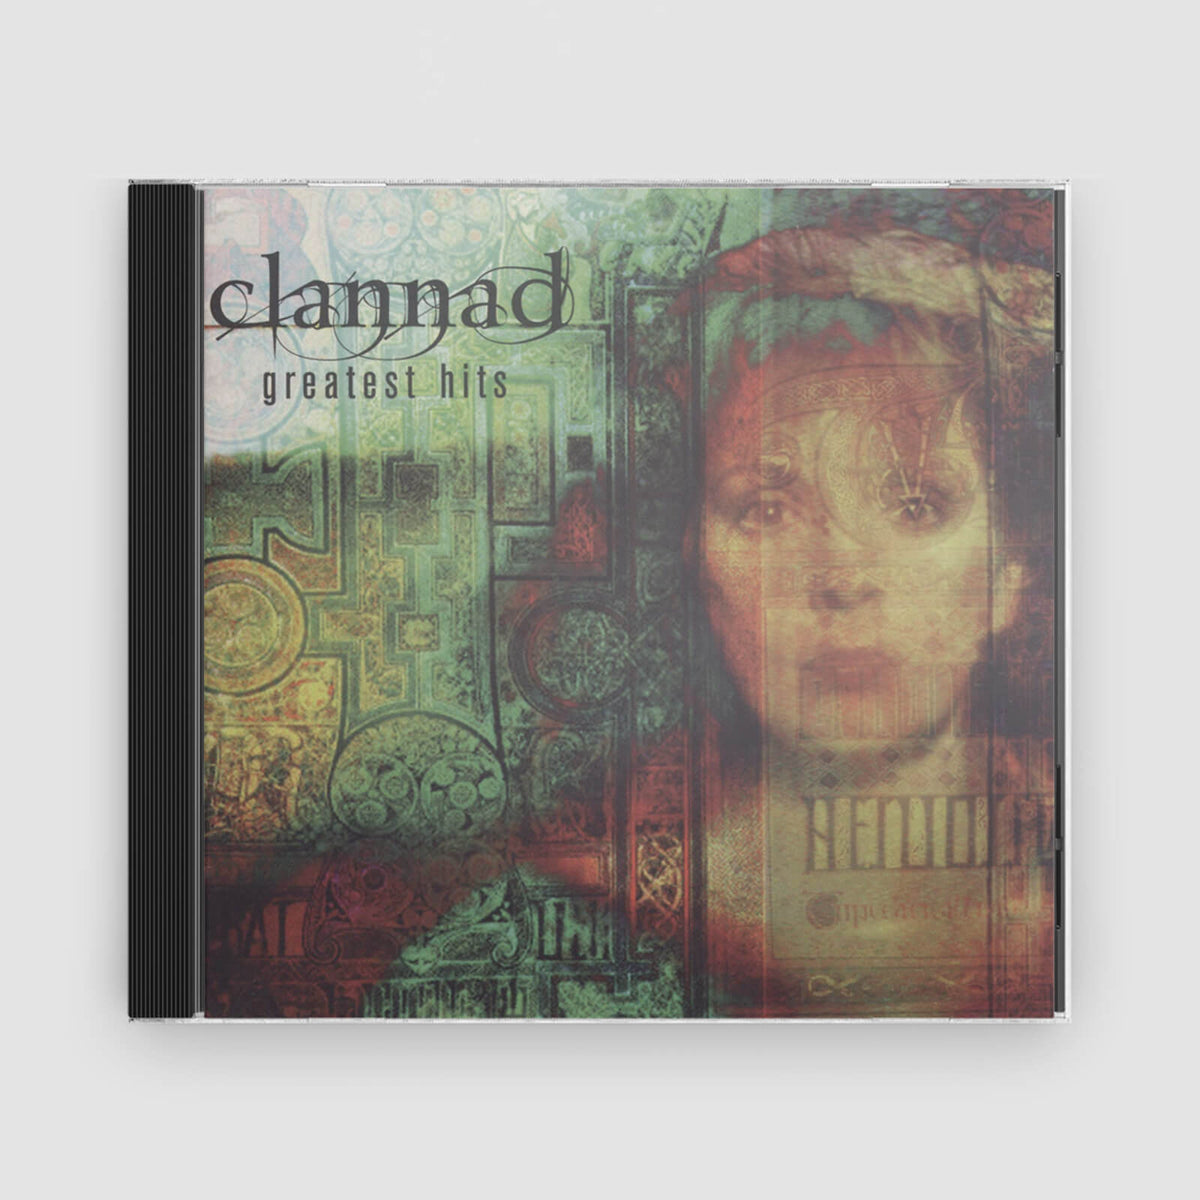 Clannad : Greatest Hits